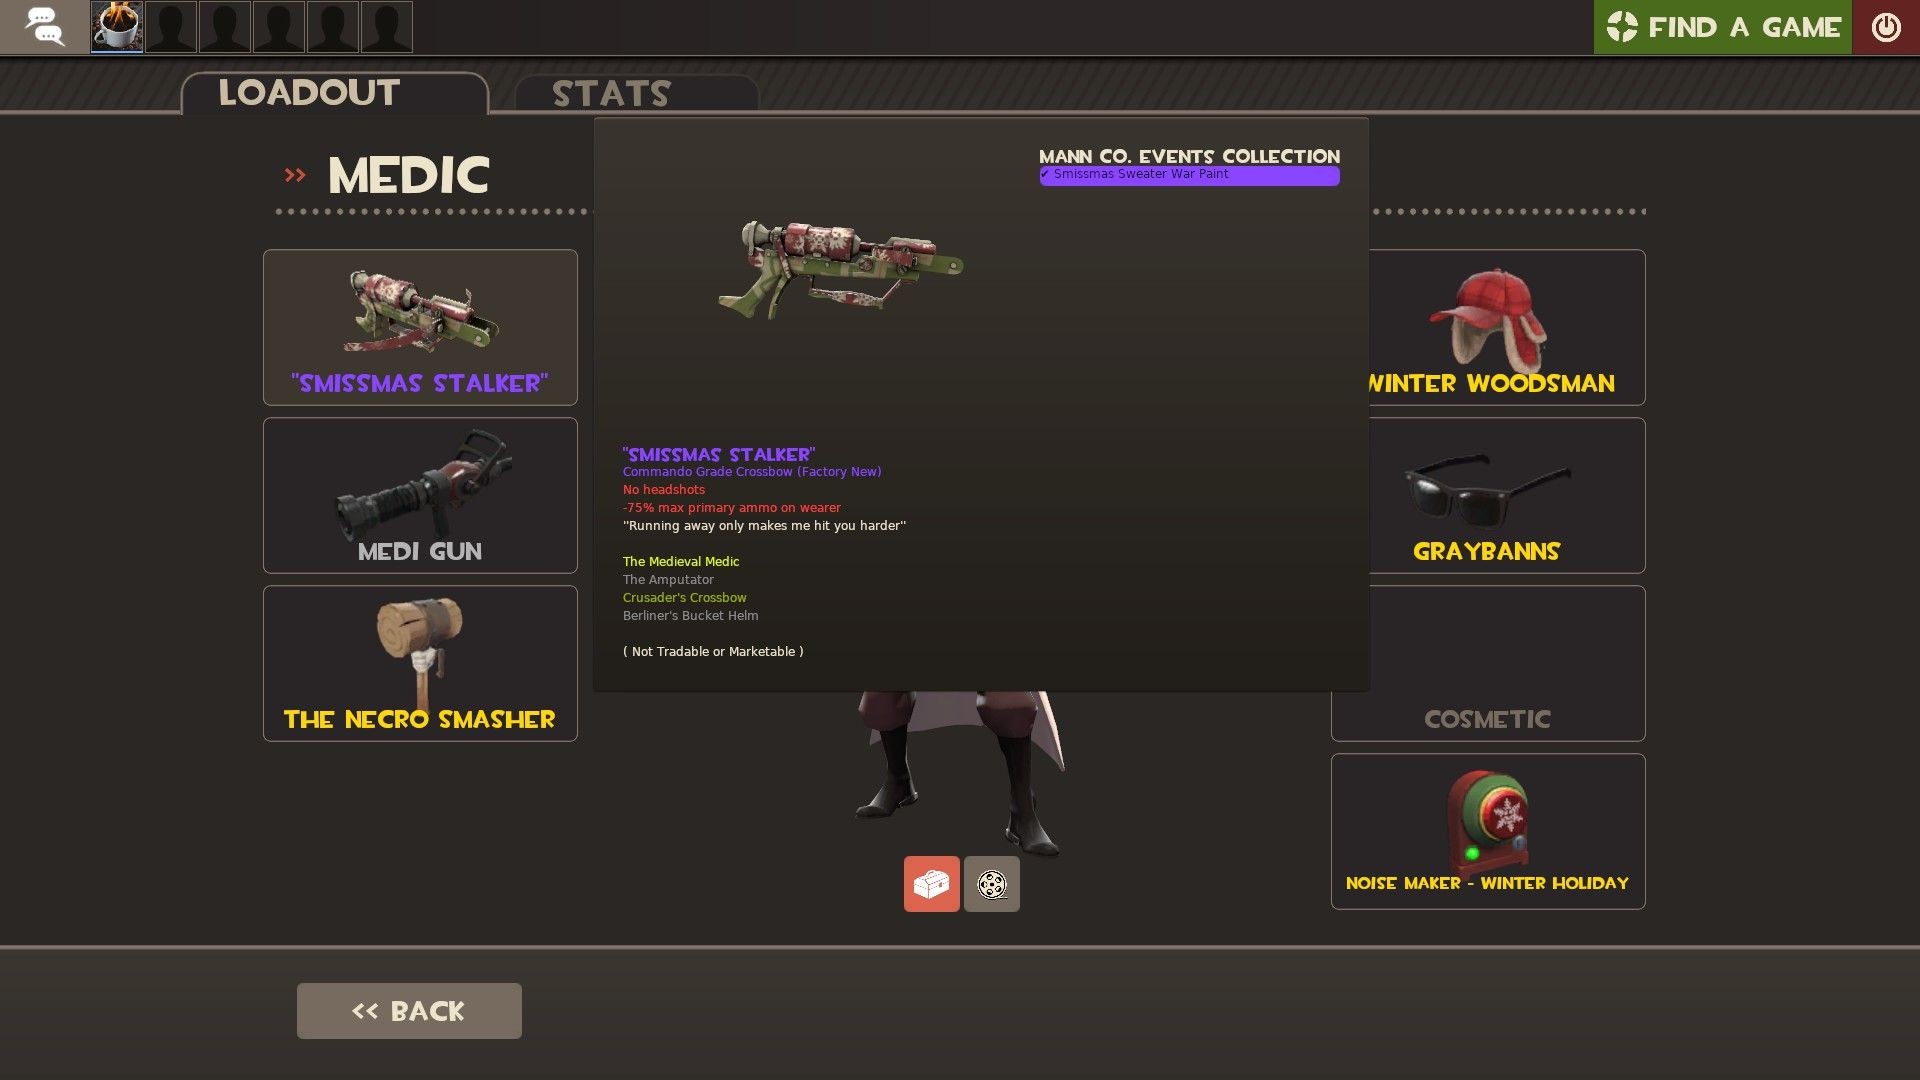 Tf2 Papercraft Damage and Heal Ramp Up are Good Games Teamfortress2 Steam Tf2